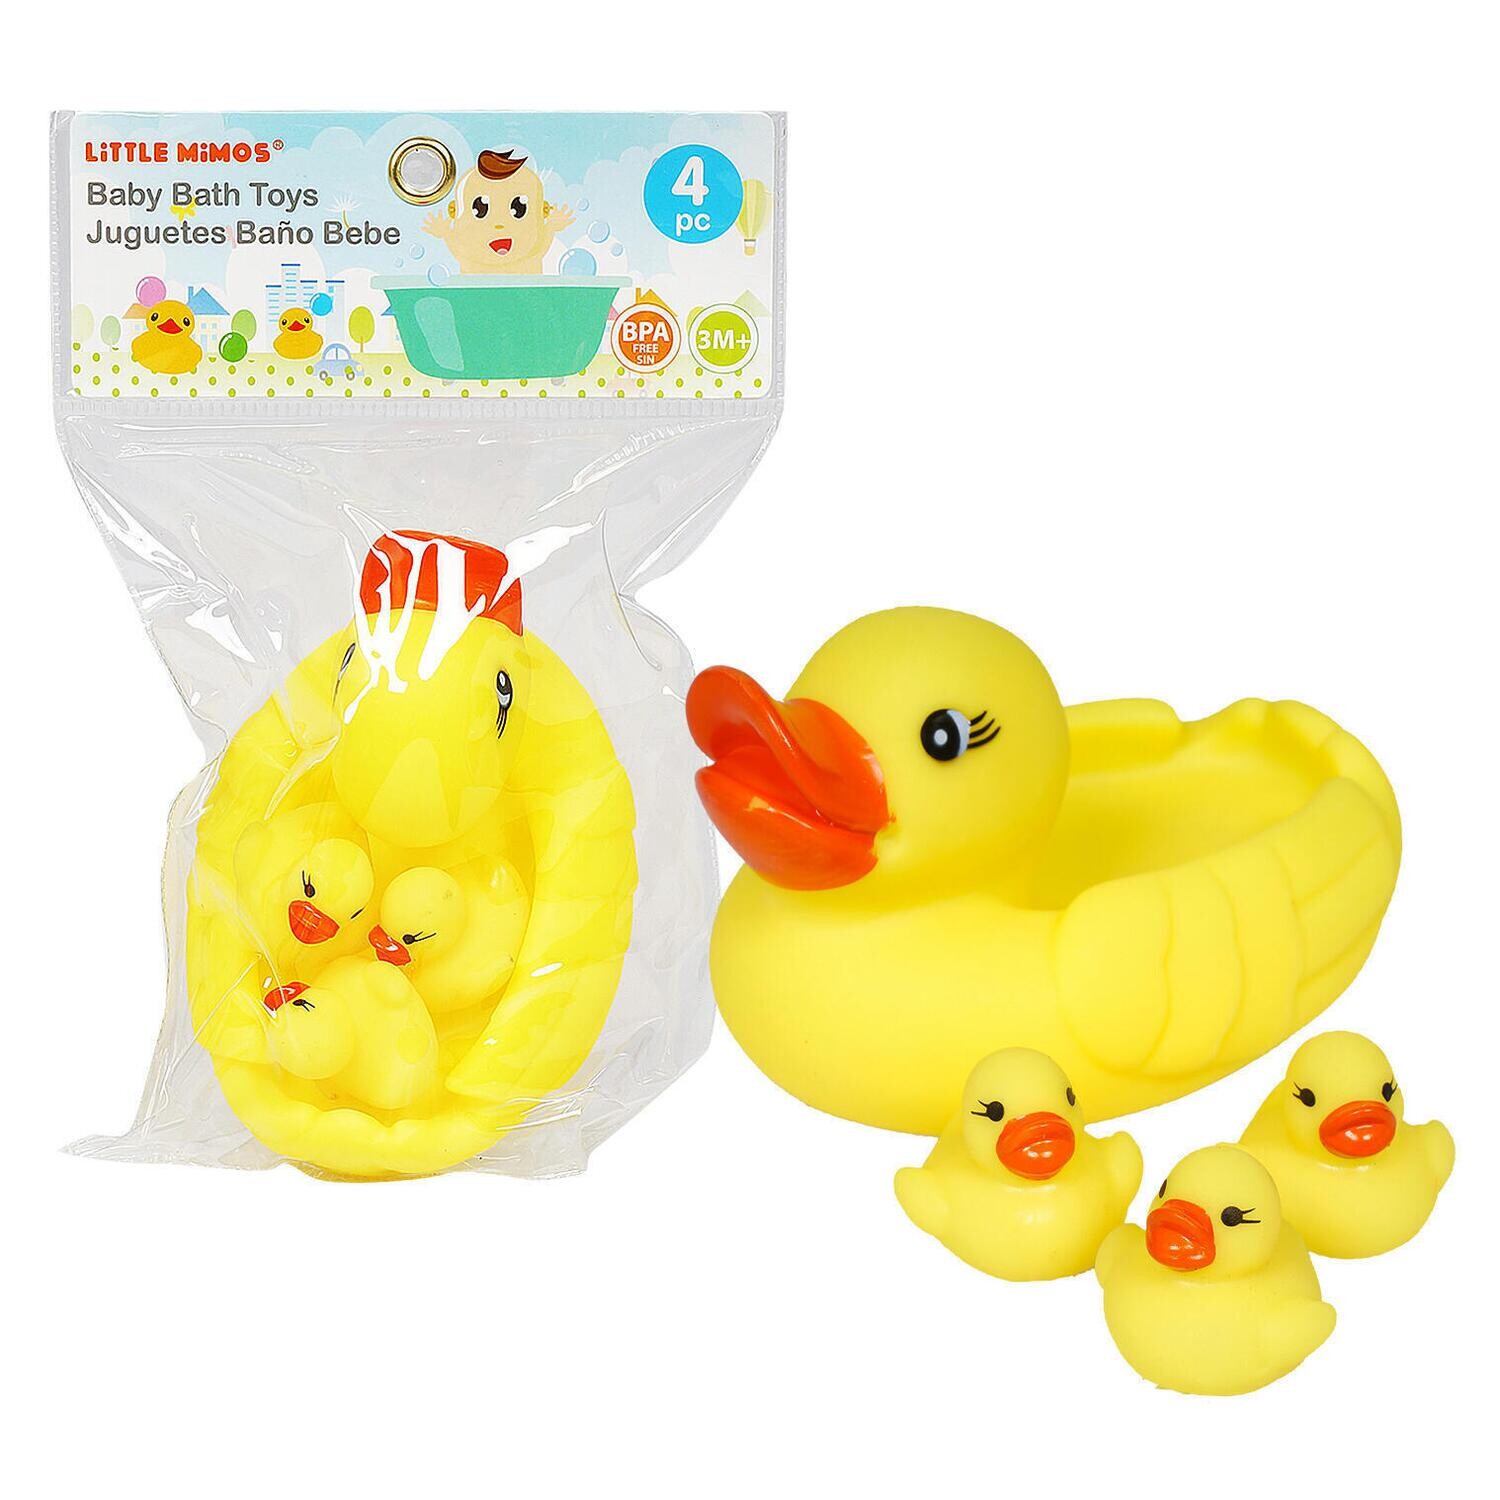 . Case of [36] Rubber Ducky Bath Toy Sets - 4 Pieces .